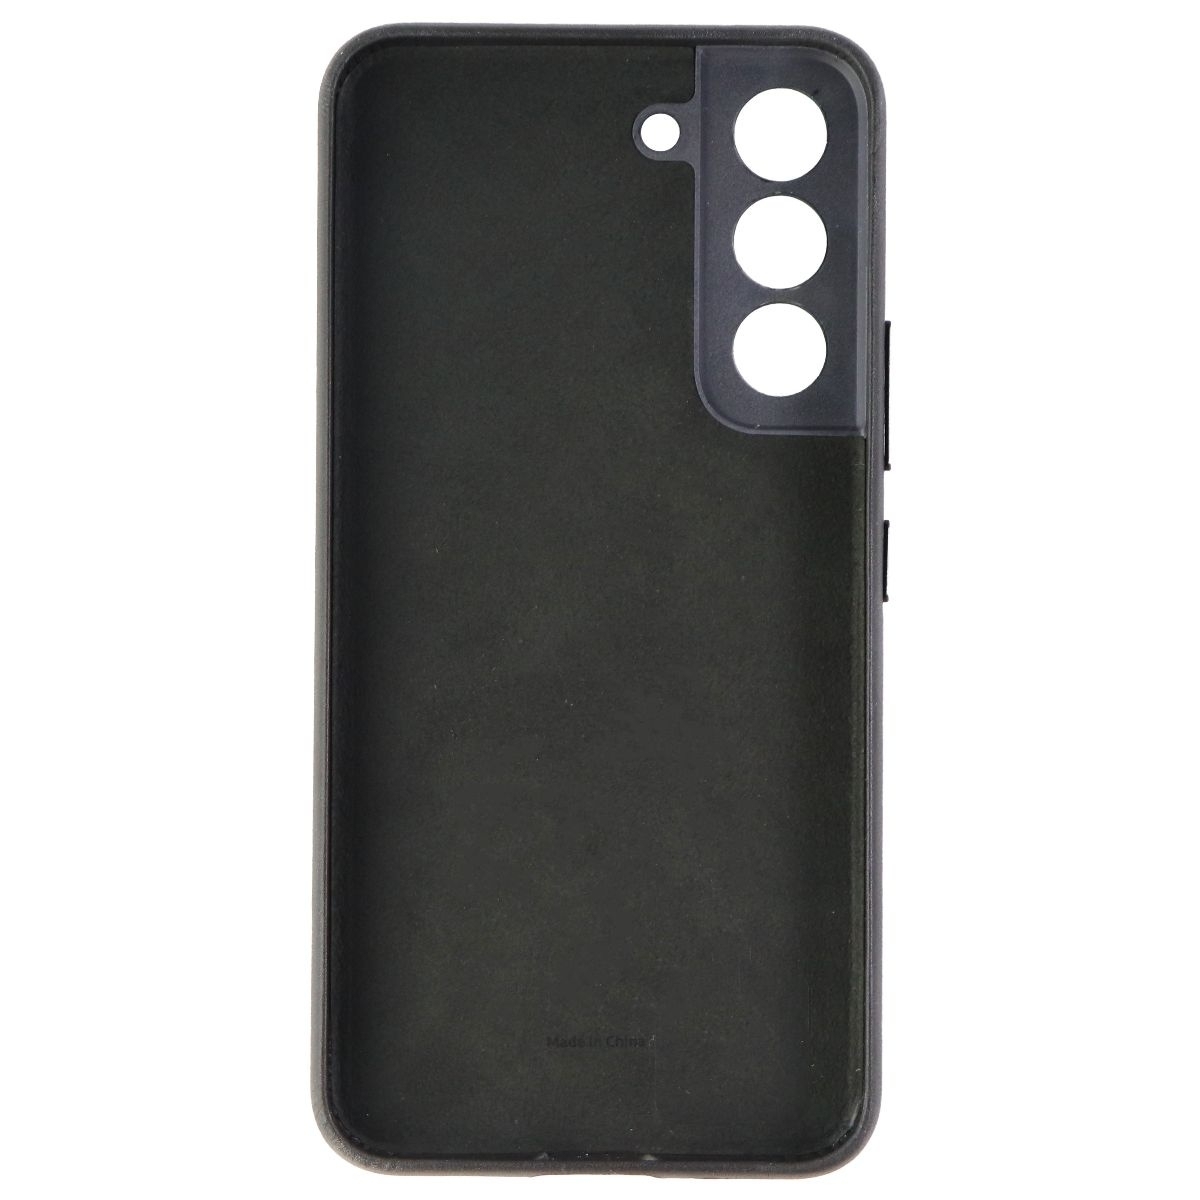 Samsung Leather Cover Case For Galaxy S22 - Black (EF-VS901LBEVZW)